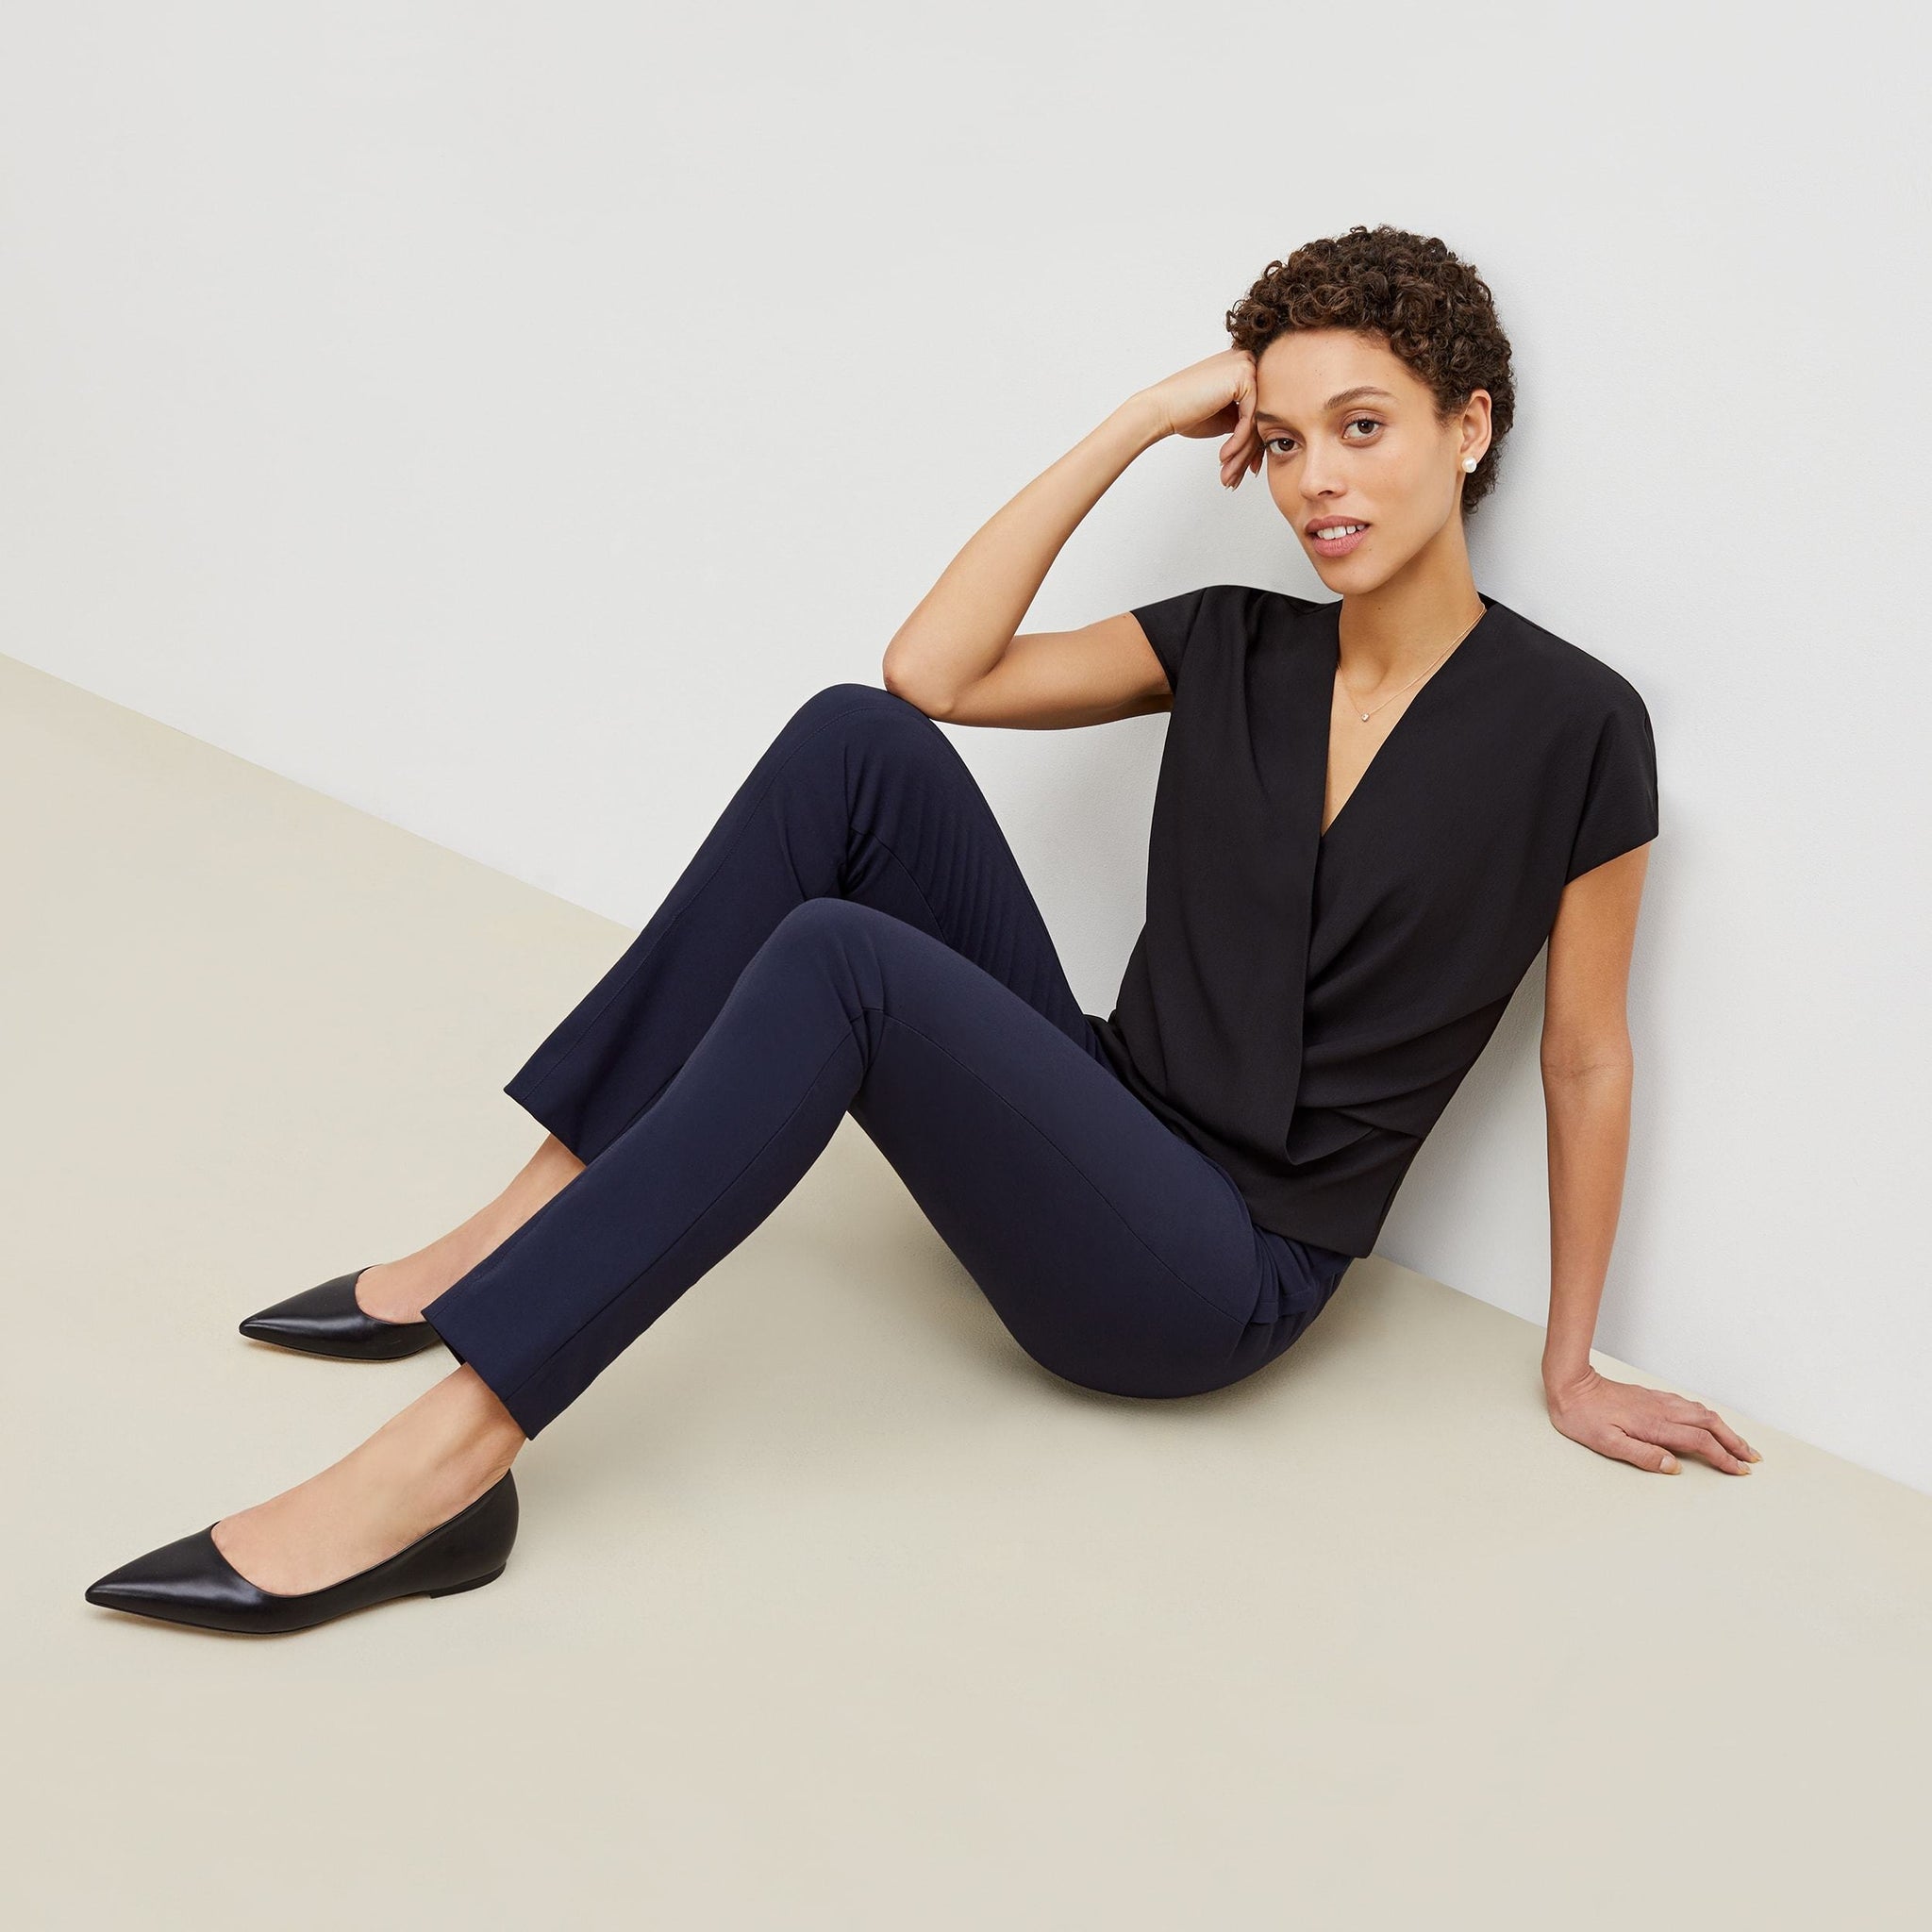 Front image of a woman standing wearing the foster pant in dark navy